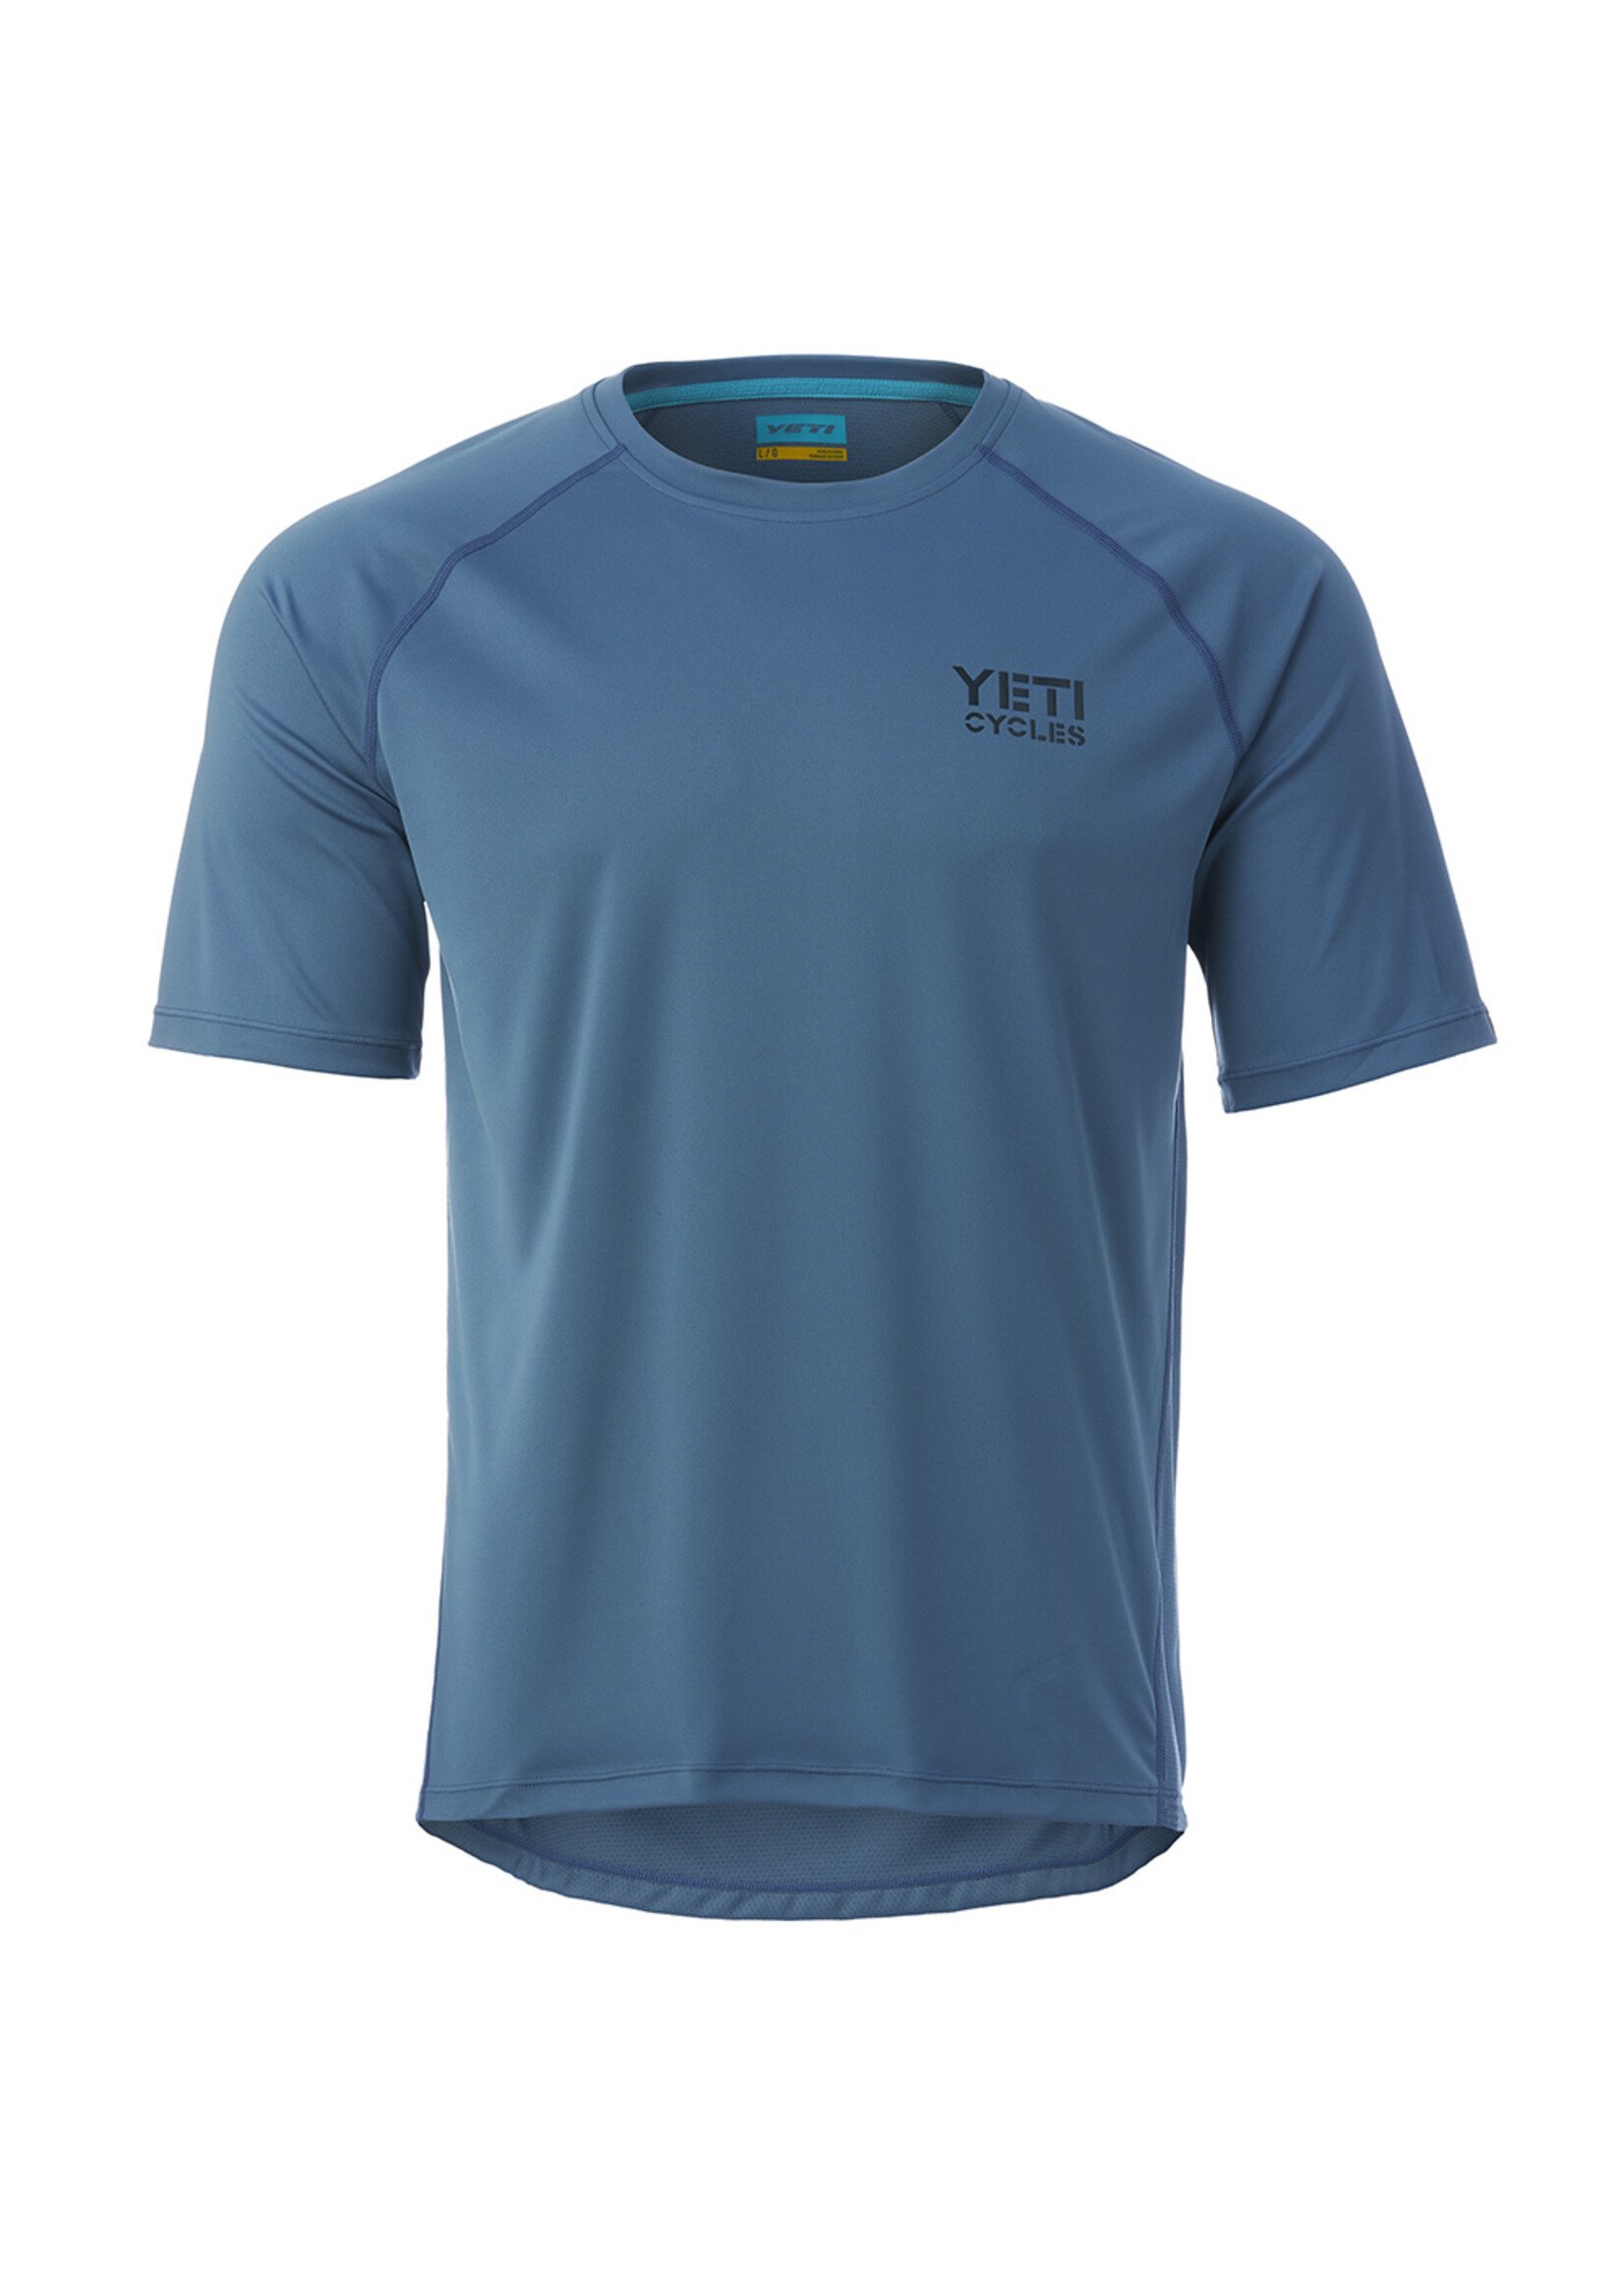 Yeti Cycles TOLLAND S/S JERSEY